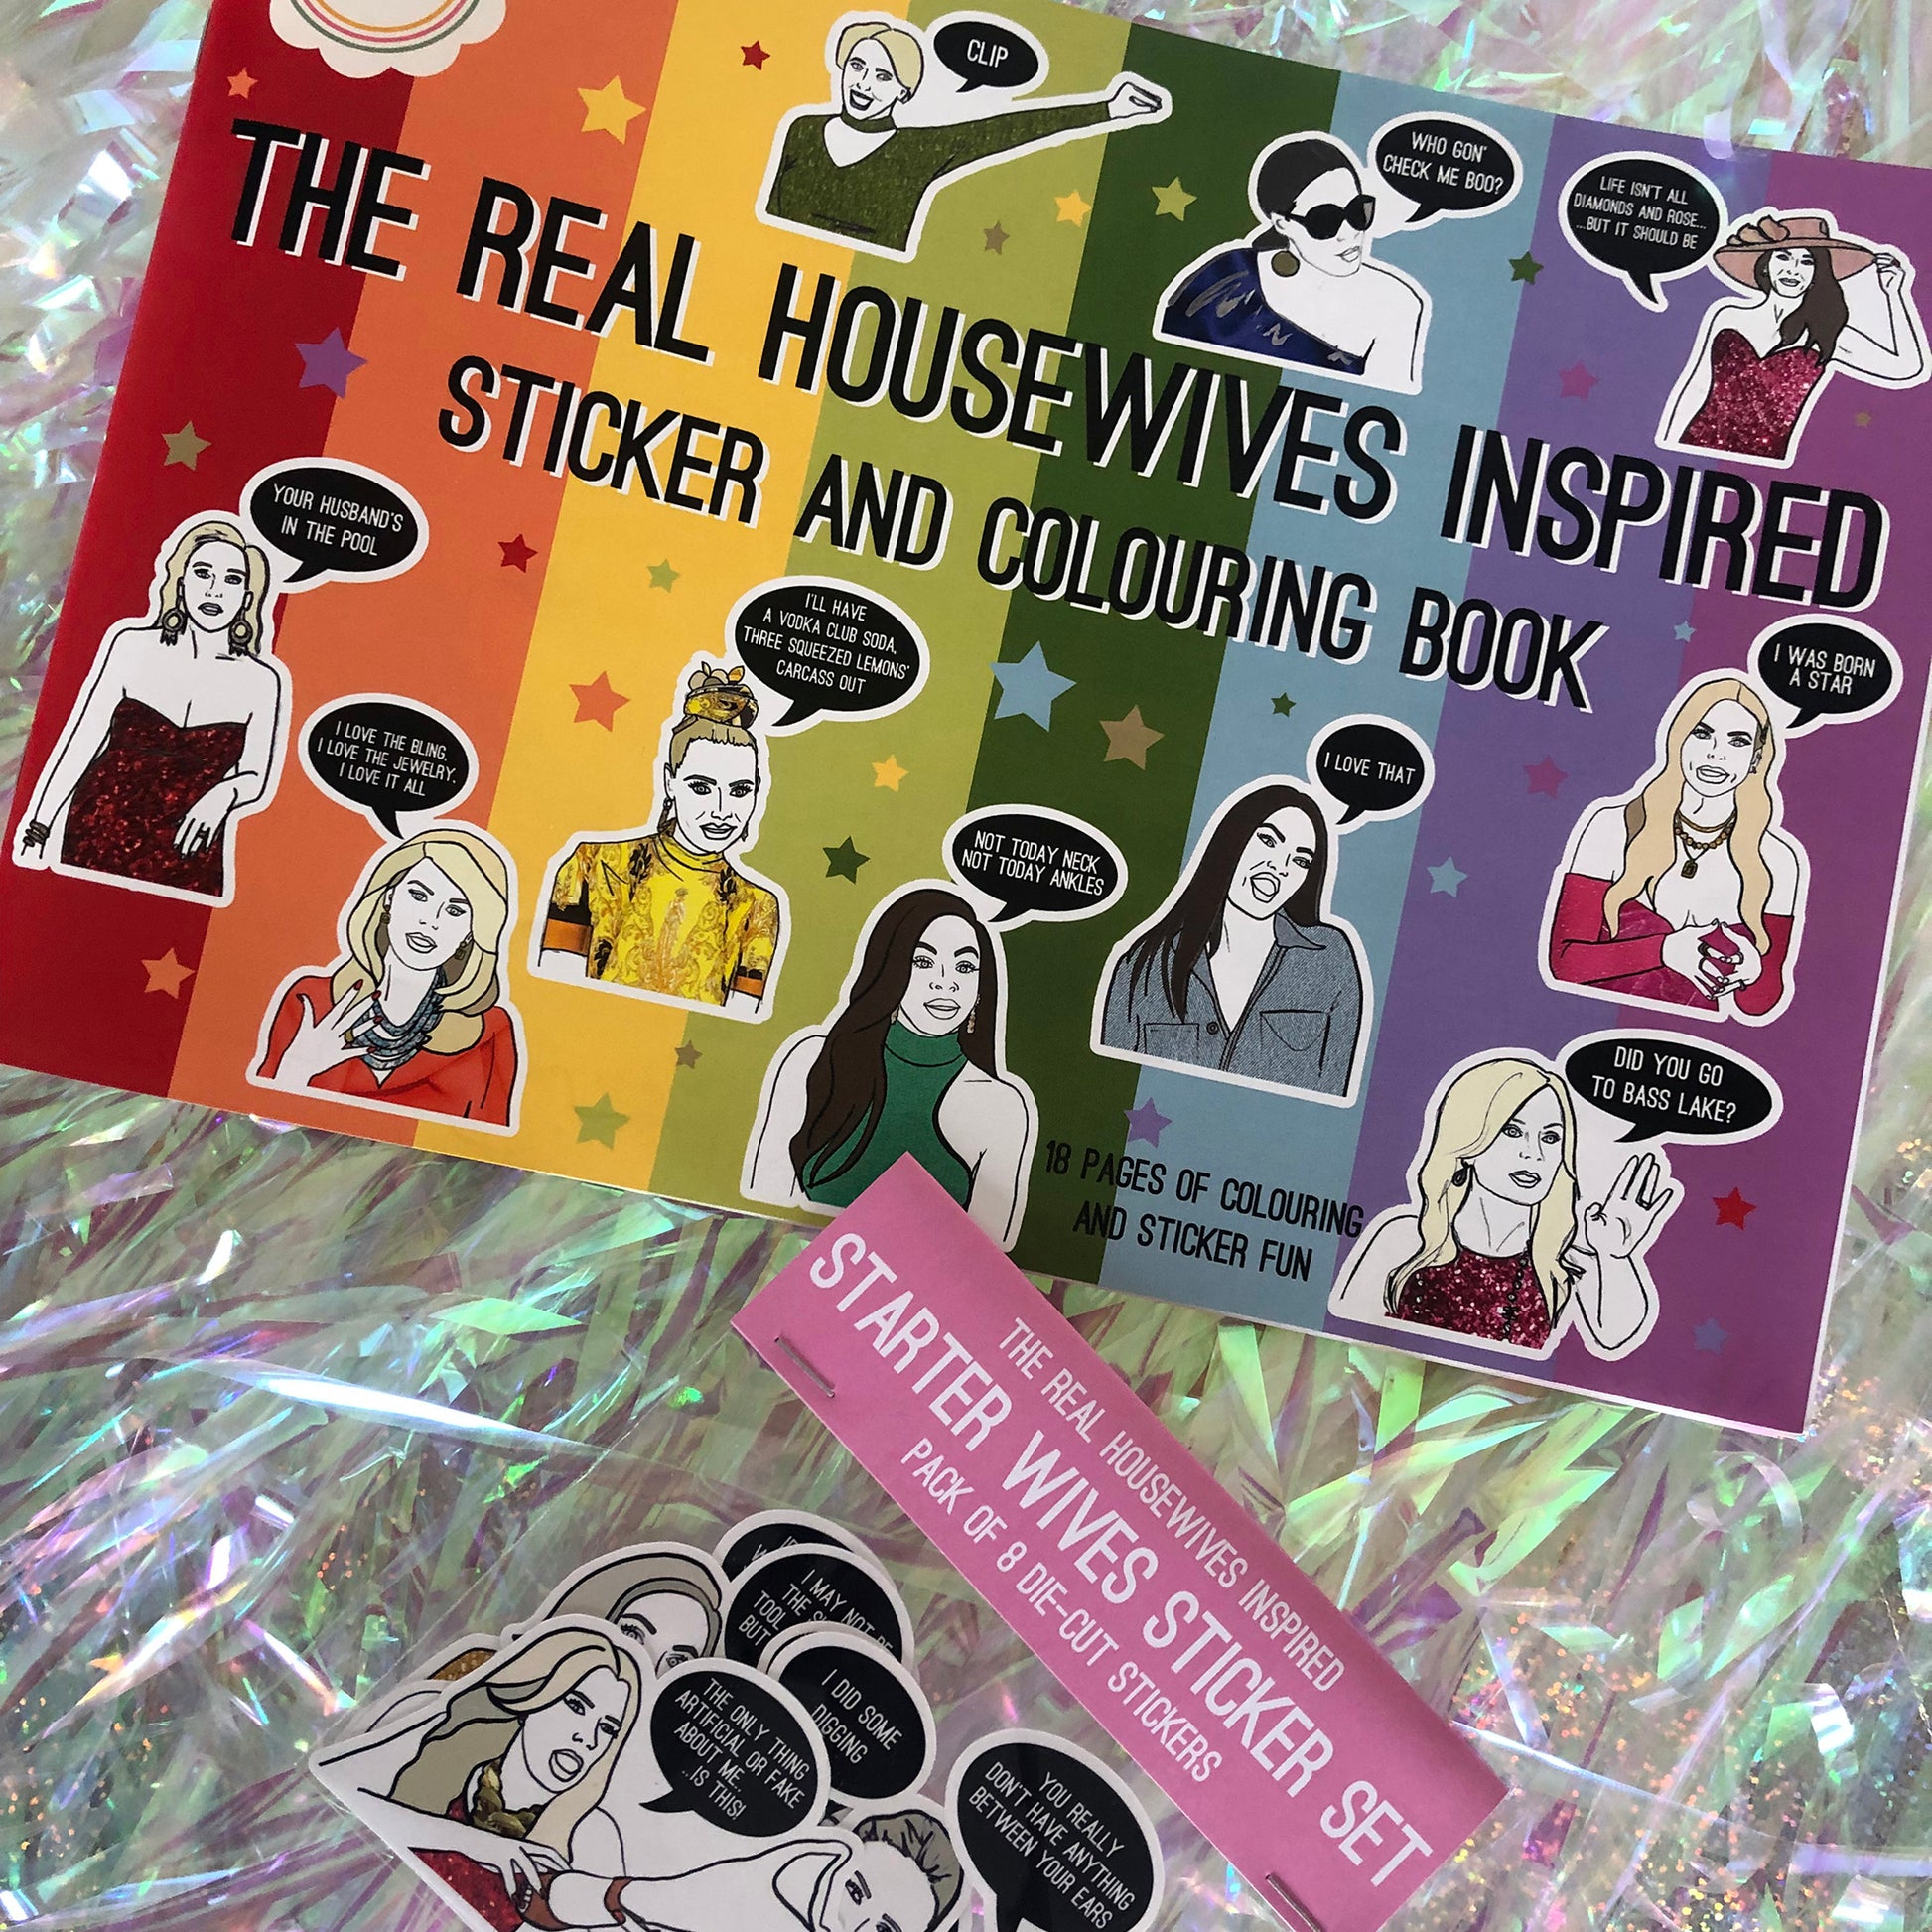 Image shows a sticker and colouring book inspired by The Real Housewives